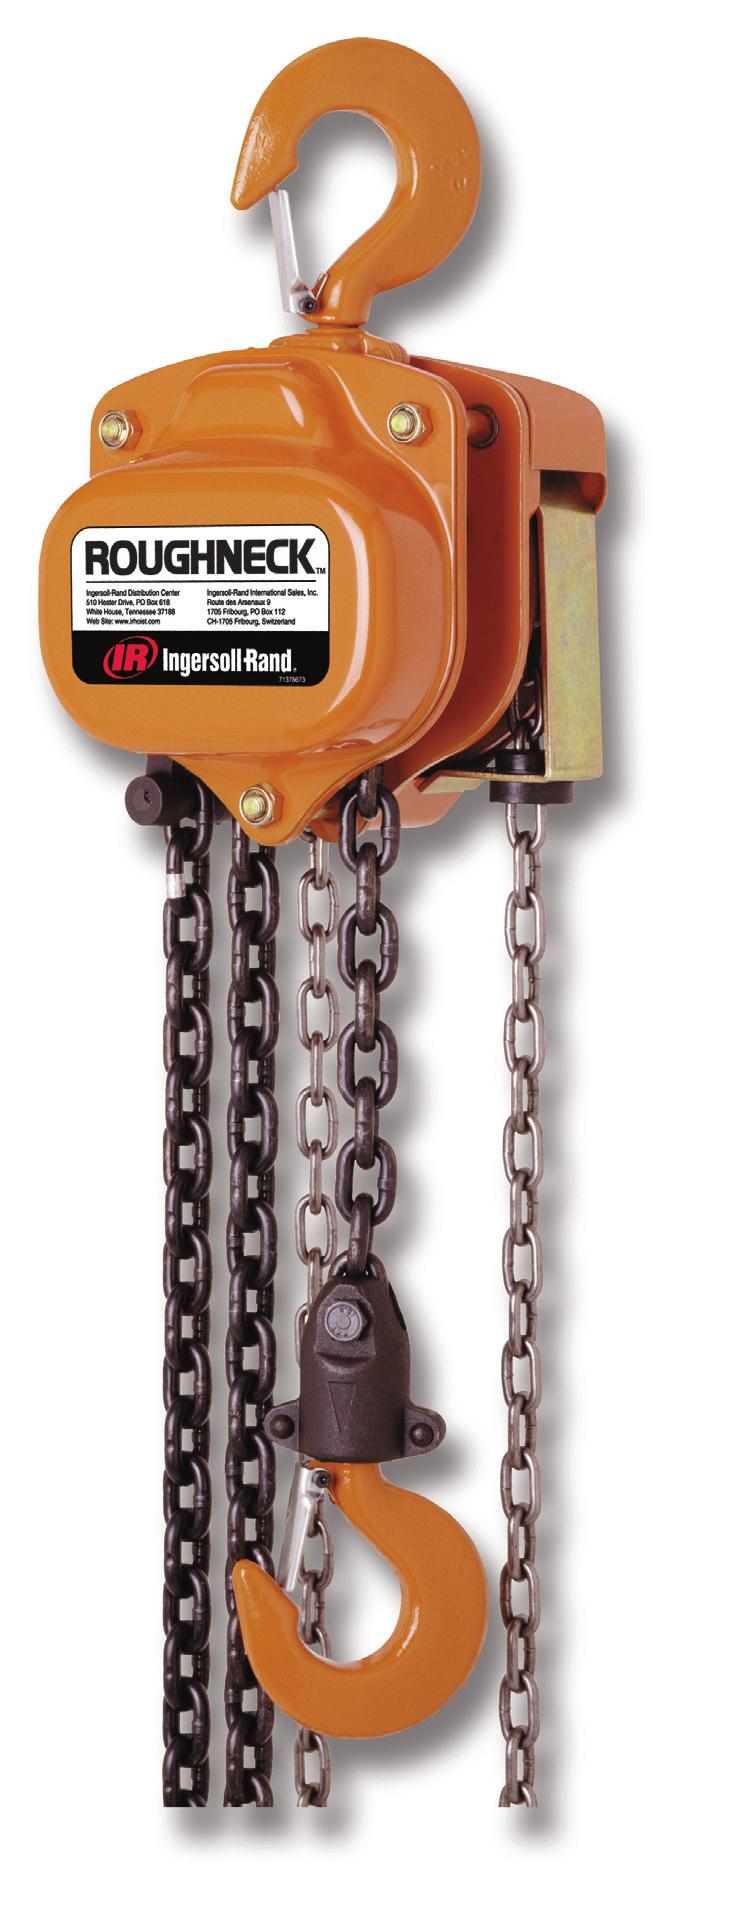 VL2 Premium Series Manual hain Hoist 1/2 20 metric ton Lifting apacity Our top of the line manual chain hoist, the VL2 Series exclusive hand chain guide provides smooth, even operation and eliminates